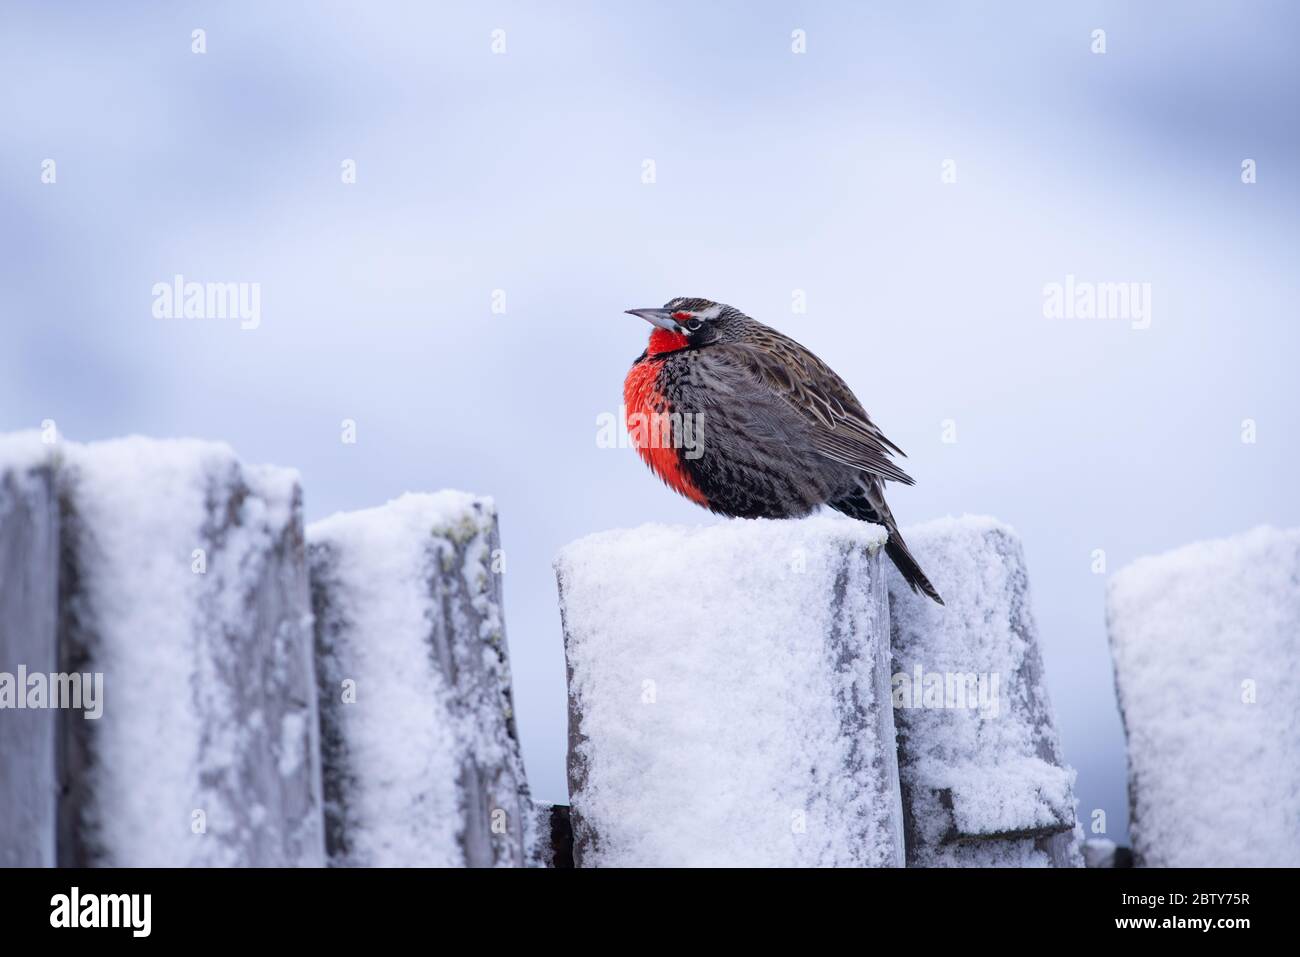 A Long-tailed Meadowlark (Sturnella loyca) during winter in Torres del Paine, Chile Stock Photo